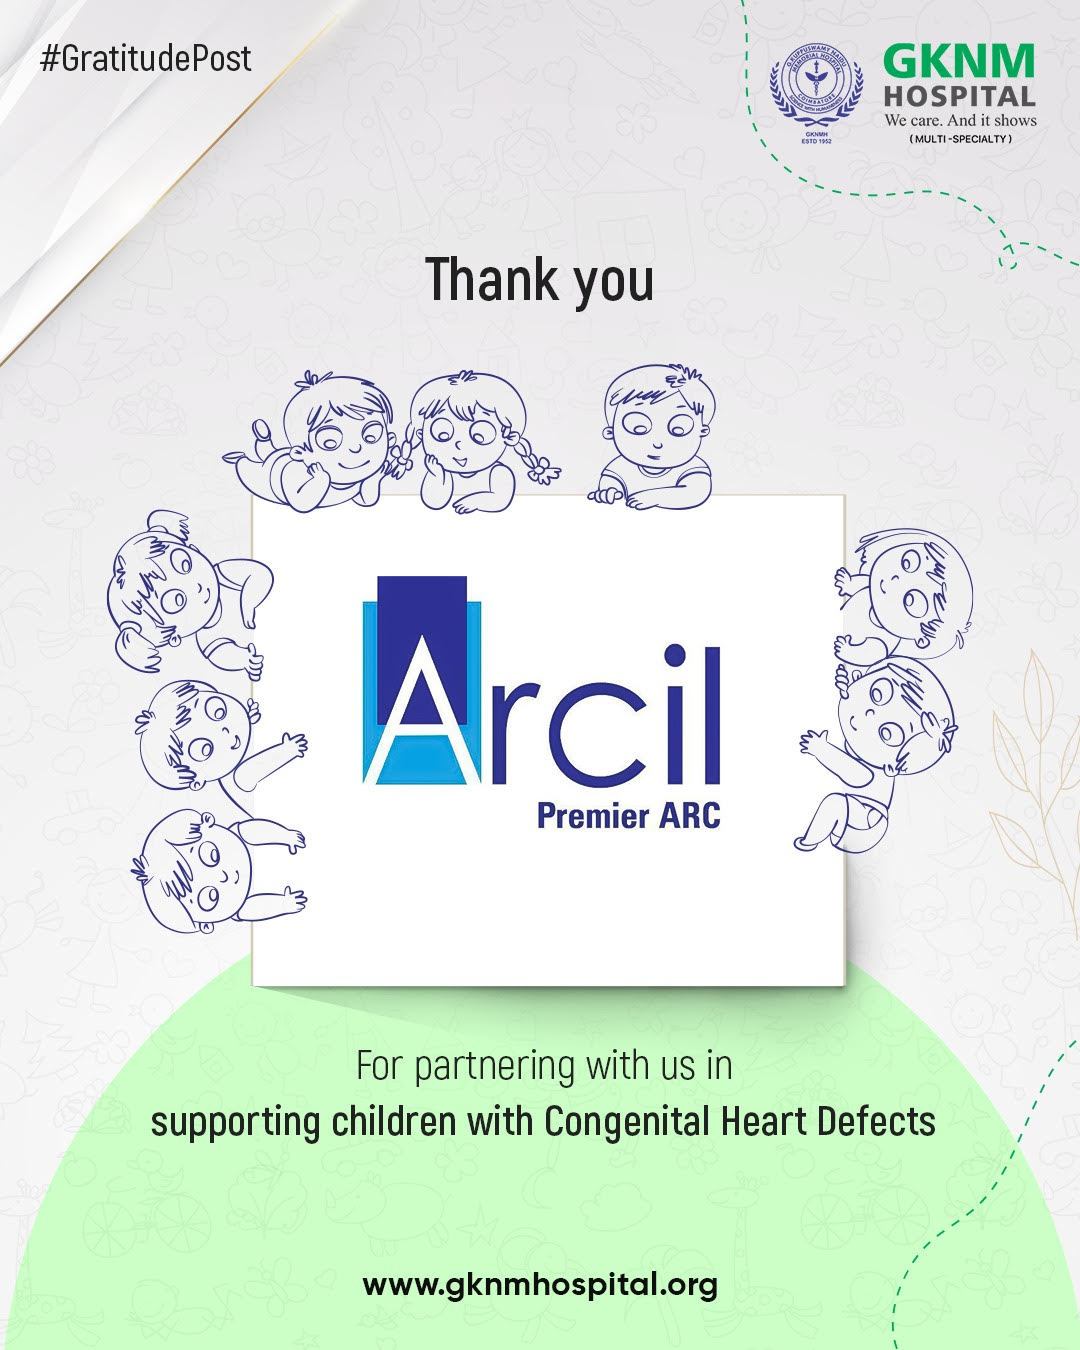 Supporting surgeries for children with Congenital Heart Disease